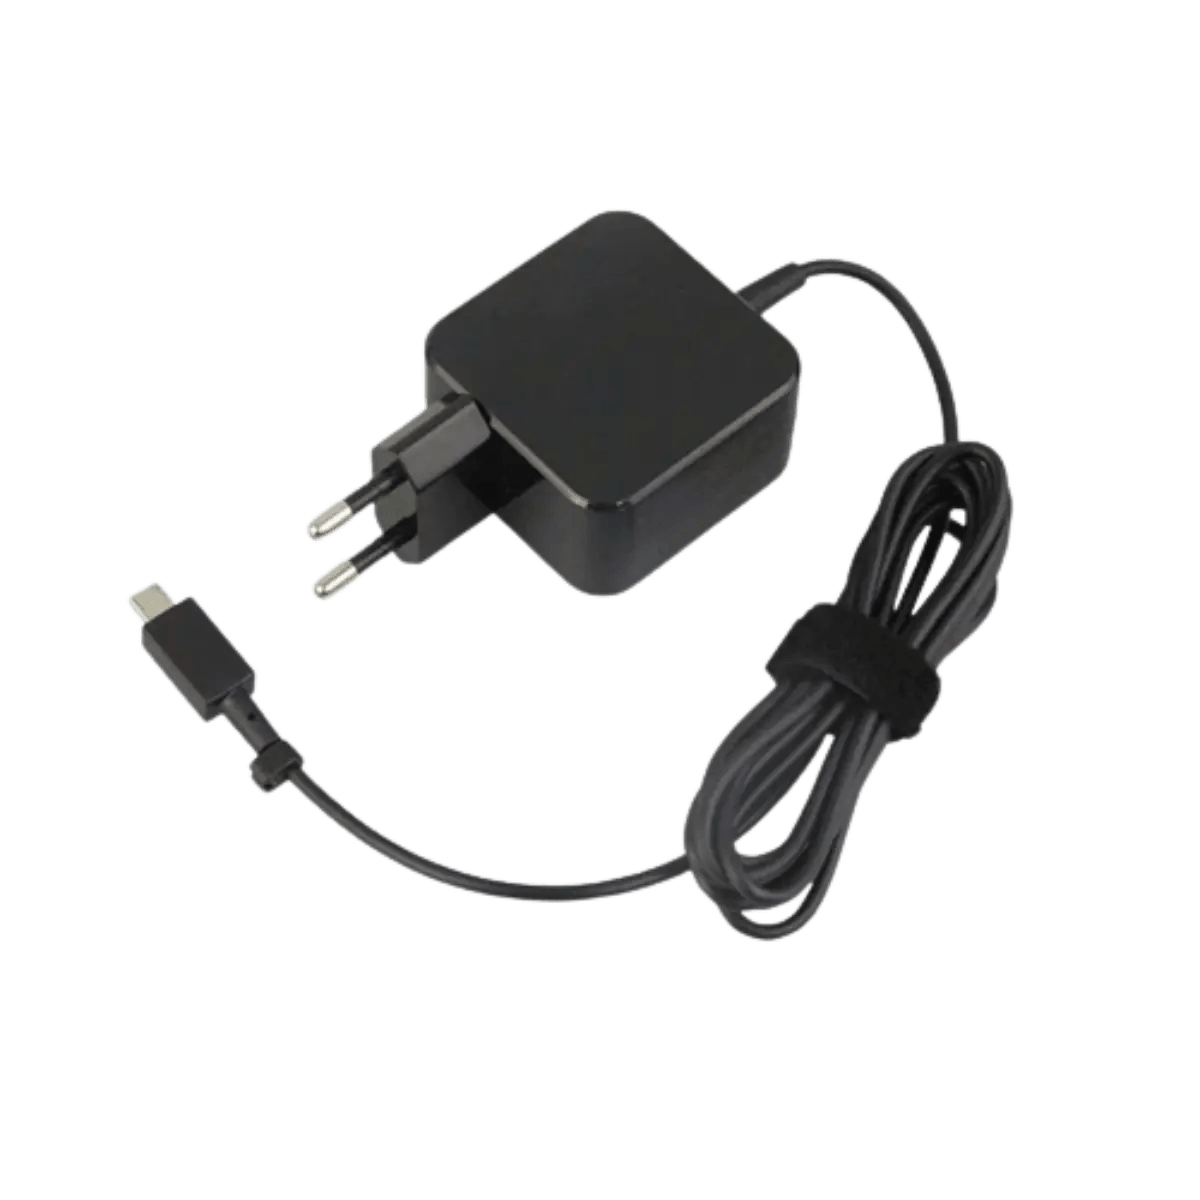 Chargeur PC 280W - 20V - 14A - 4.5x3.0mm